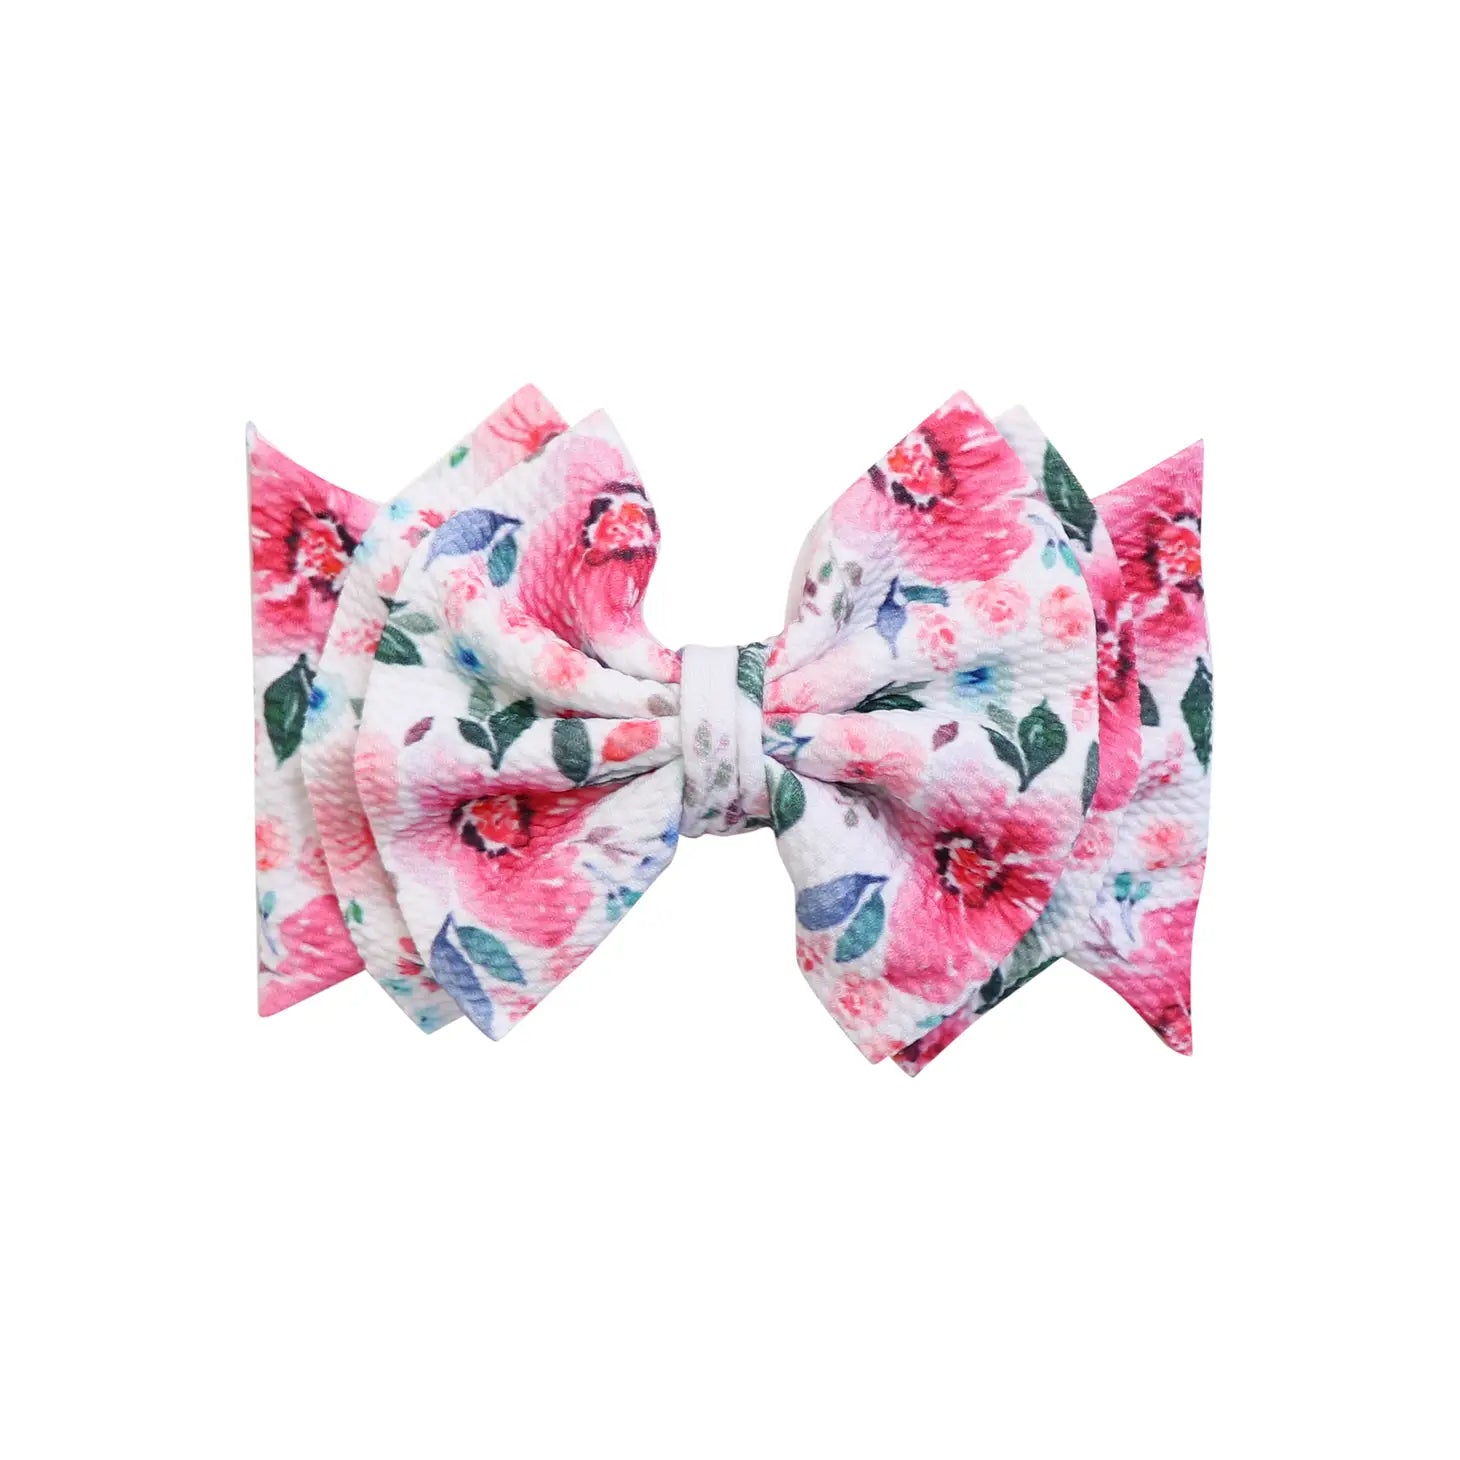 Picture of a big bow that is white with different color pink flowers, green and blue leaves